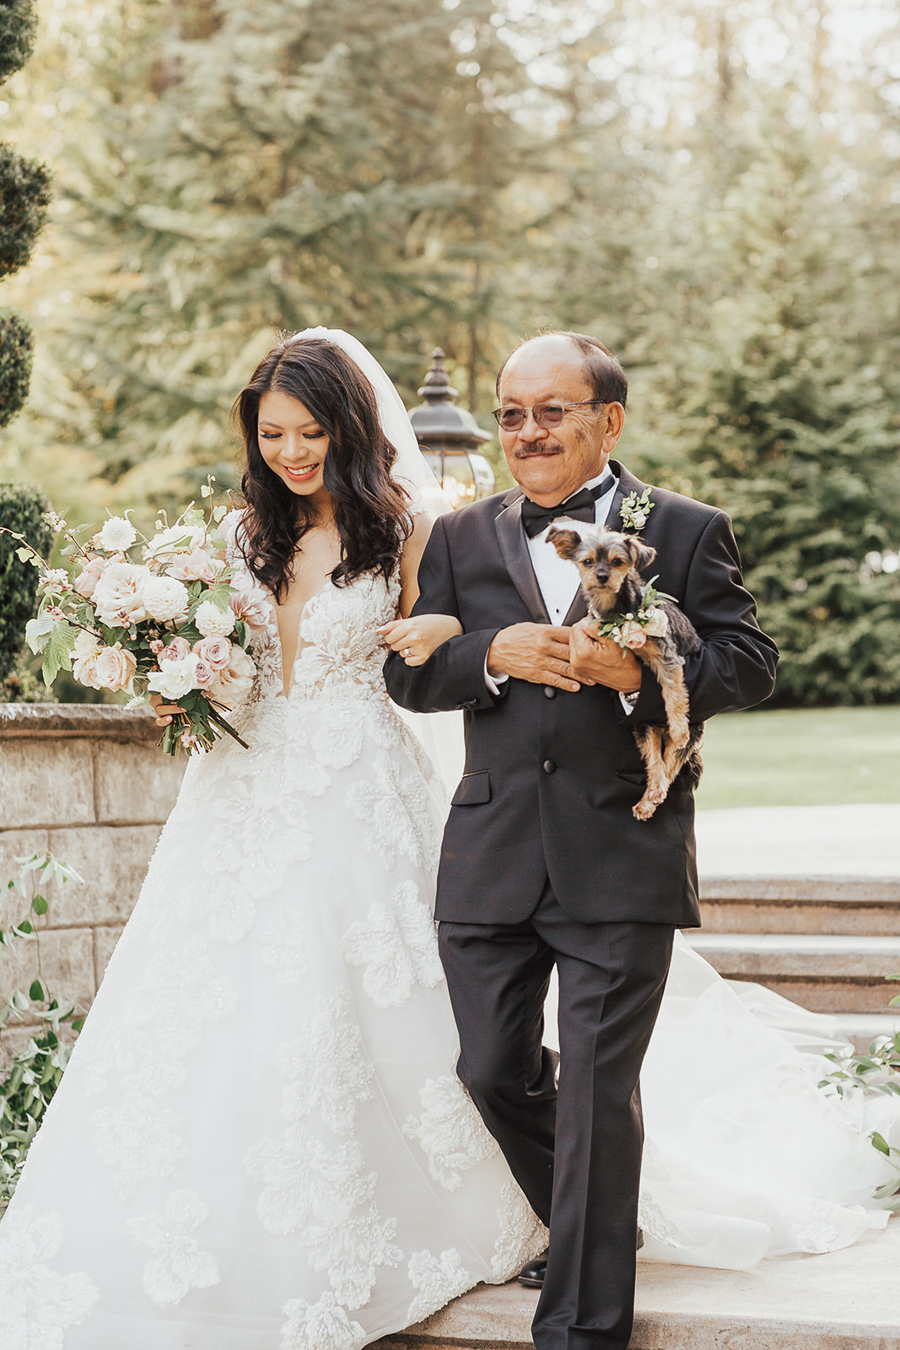 wedding ceremony details, father walks daughter down the aisle with dog